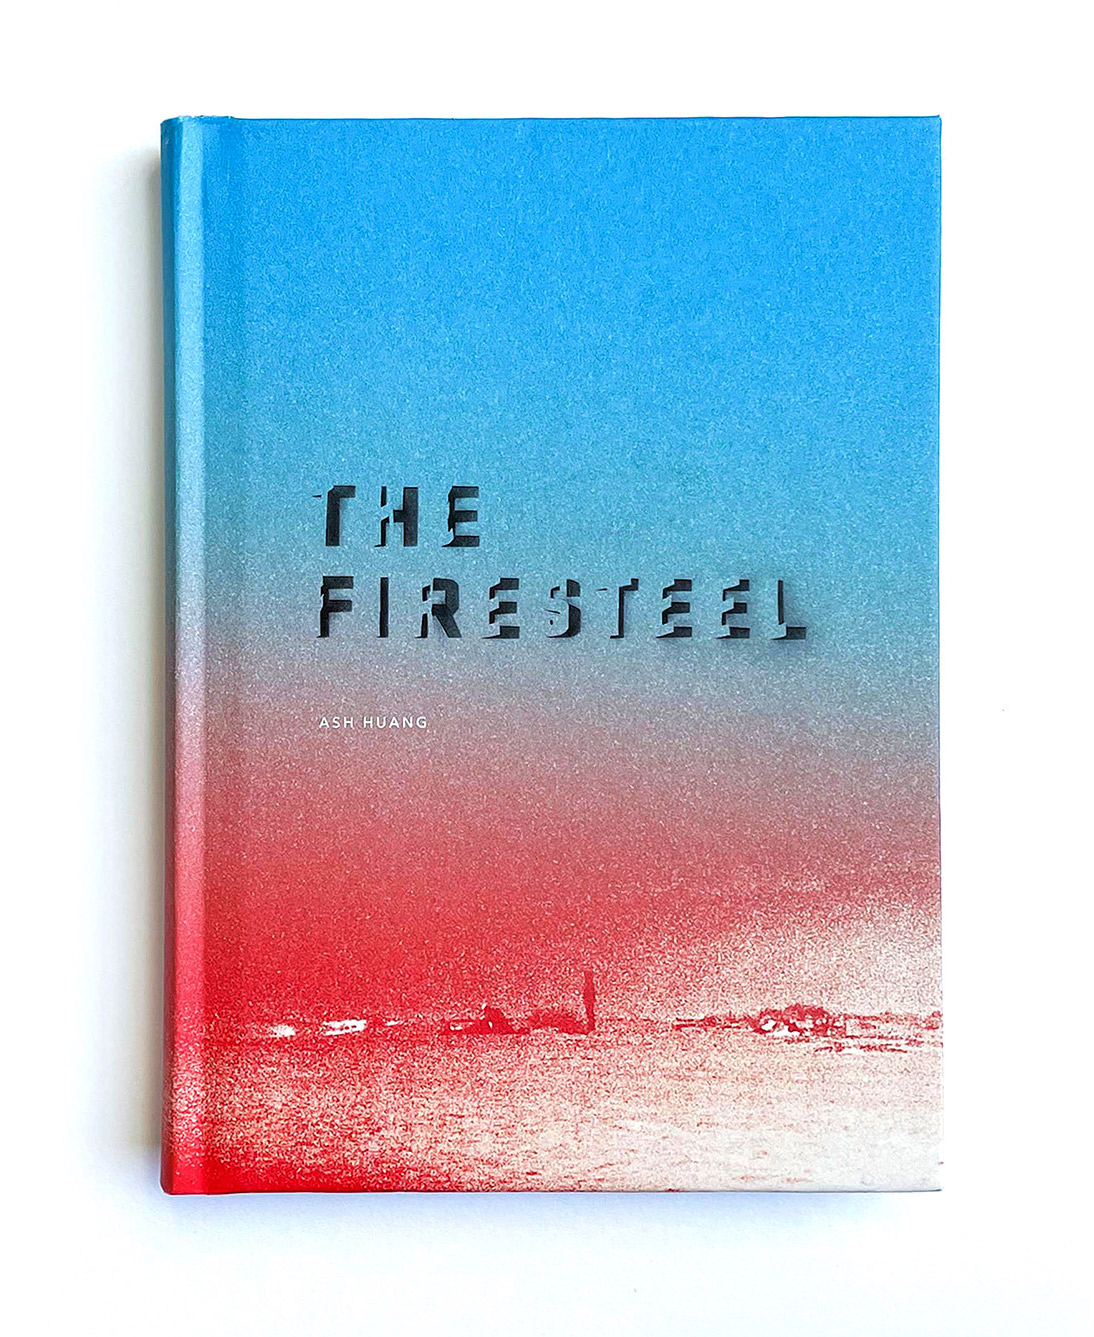 A physical copy of The Firesteel by Ash Huang